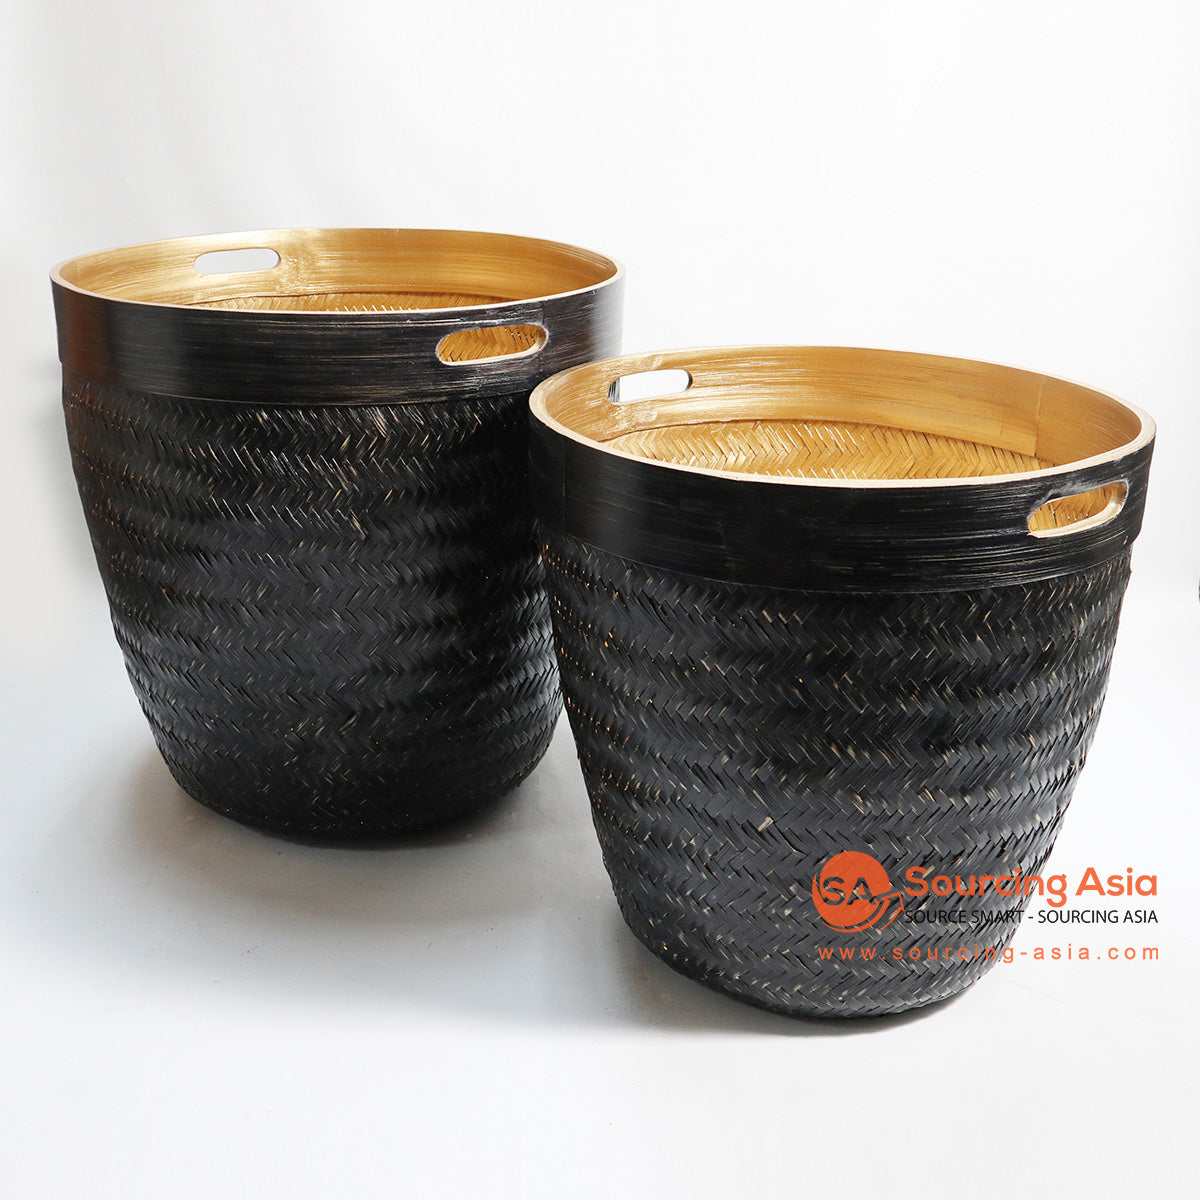 HBSC113 SET OF TWO BLACK BAMBOO BASKETS